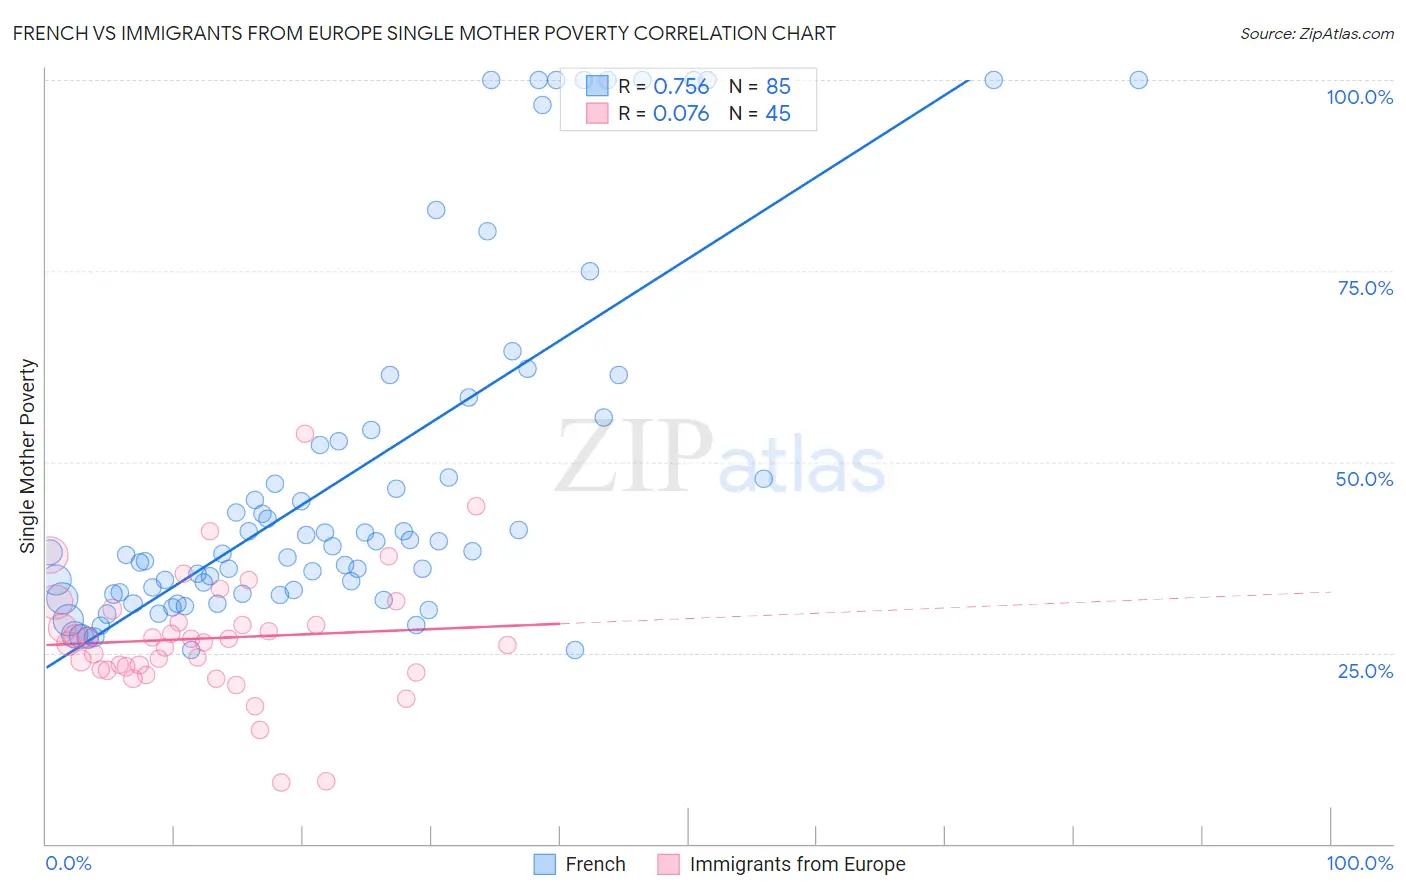 French vs Immigrants from Europe Single Mother Poverty